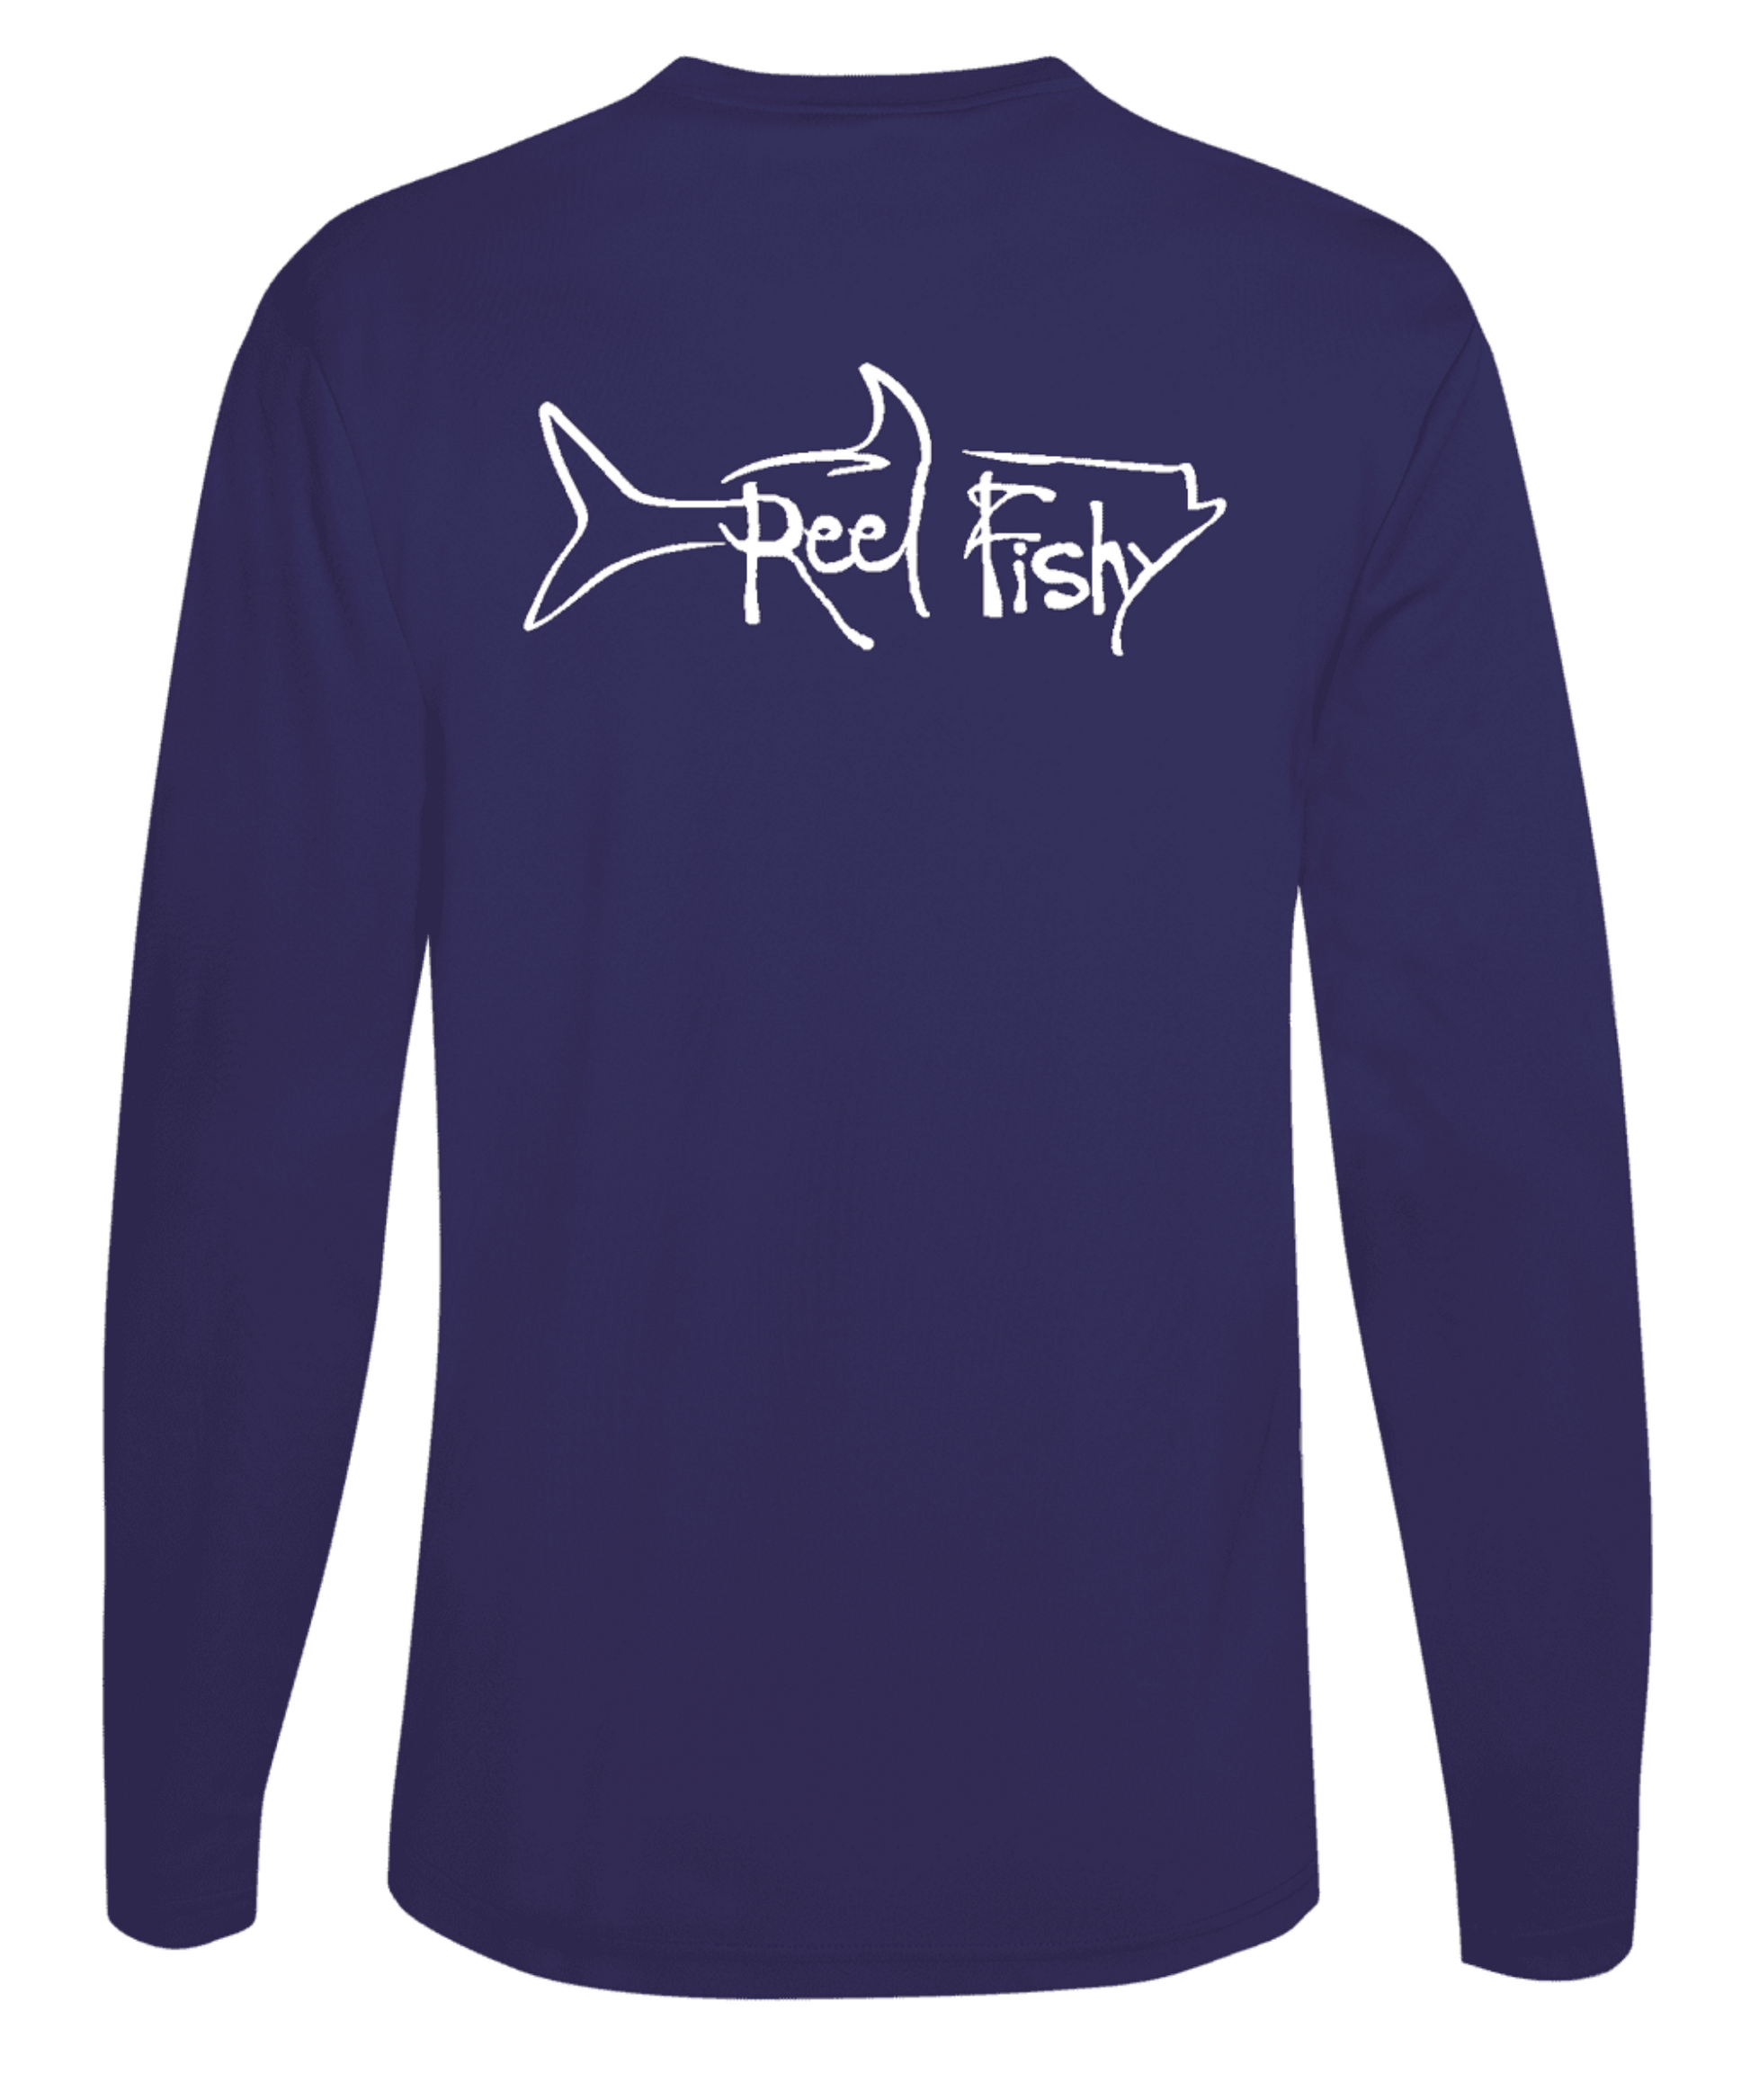 Performance Dry-Fit Tarpon Fishing long sleeve shirts with Sun Protection by Reel Fishy in Navy